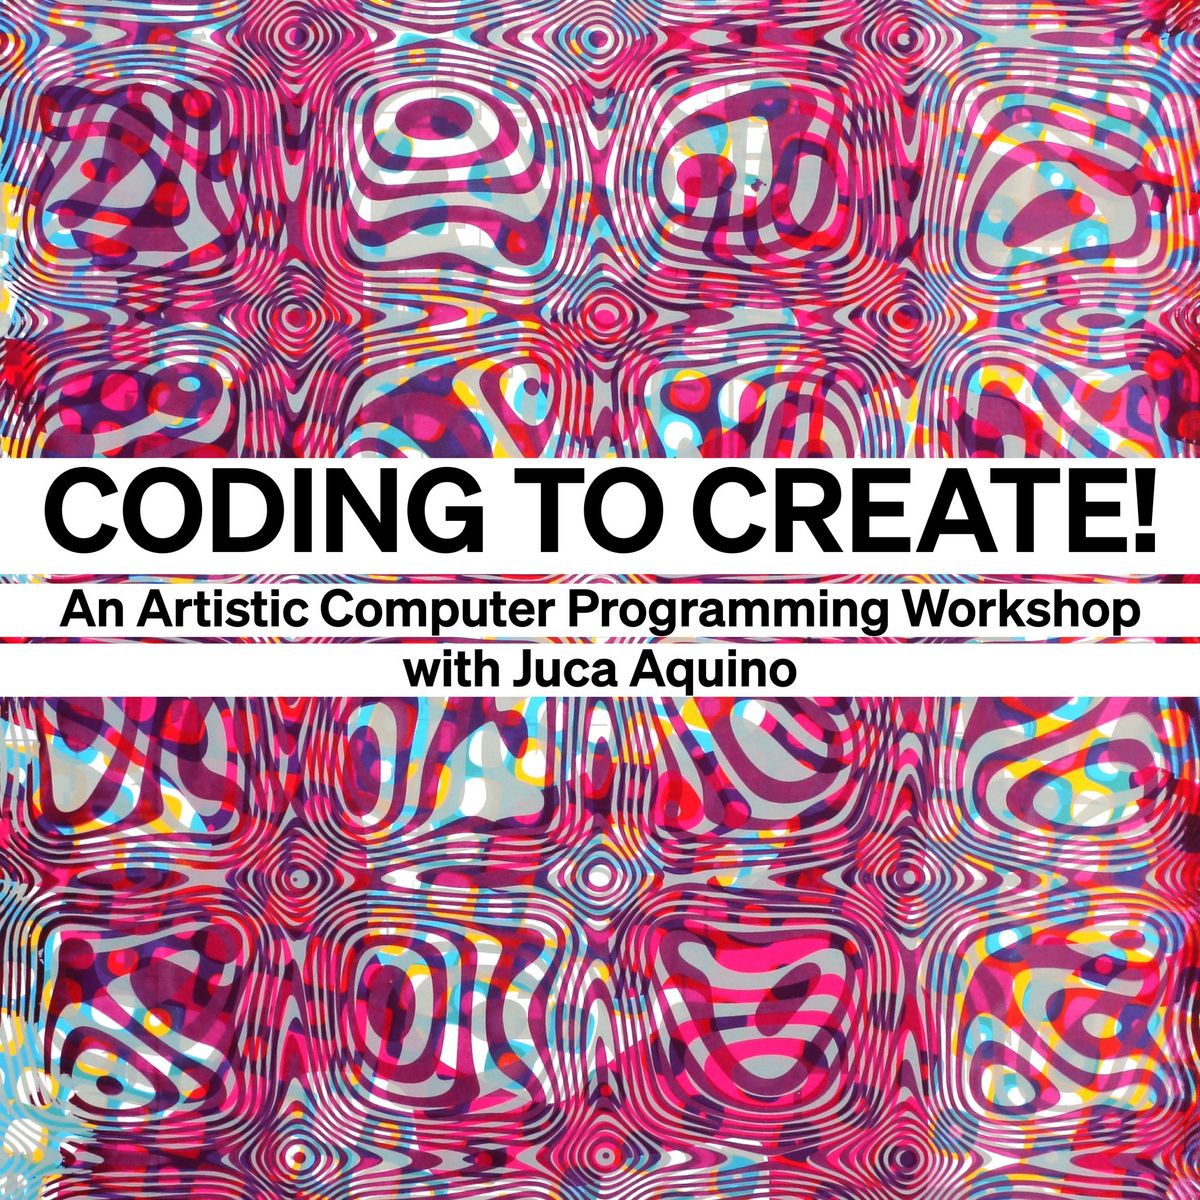 Coding to Create! An Artistic Computer Programming Workshop with Juca Aquino